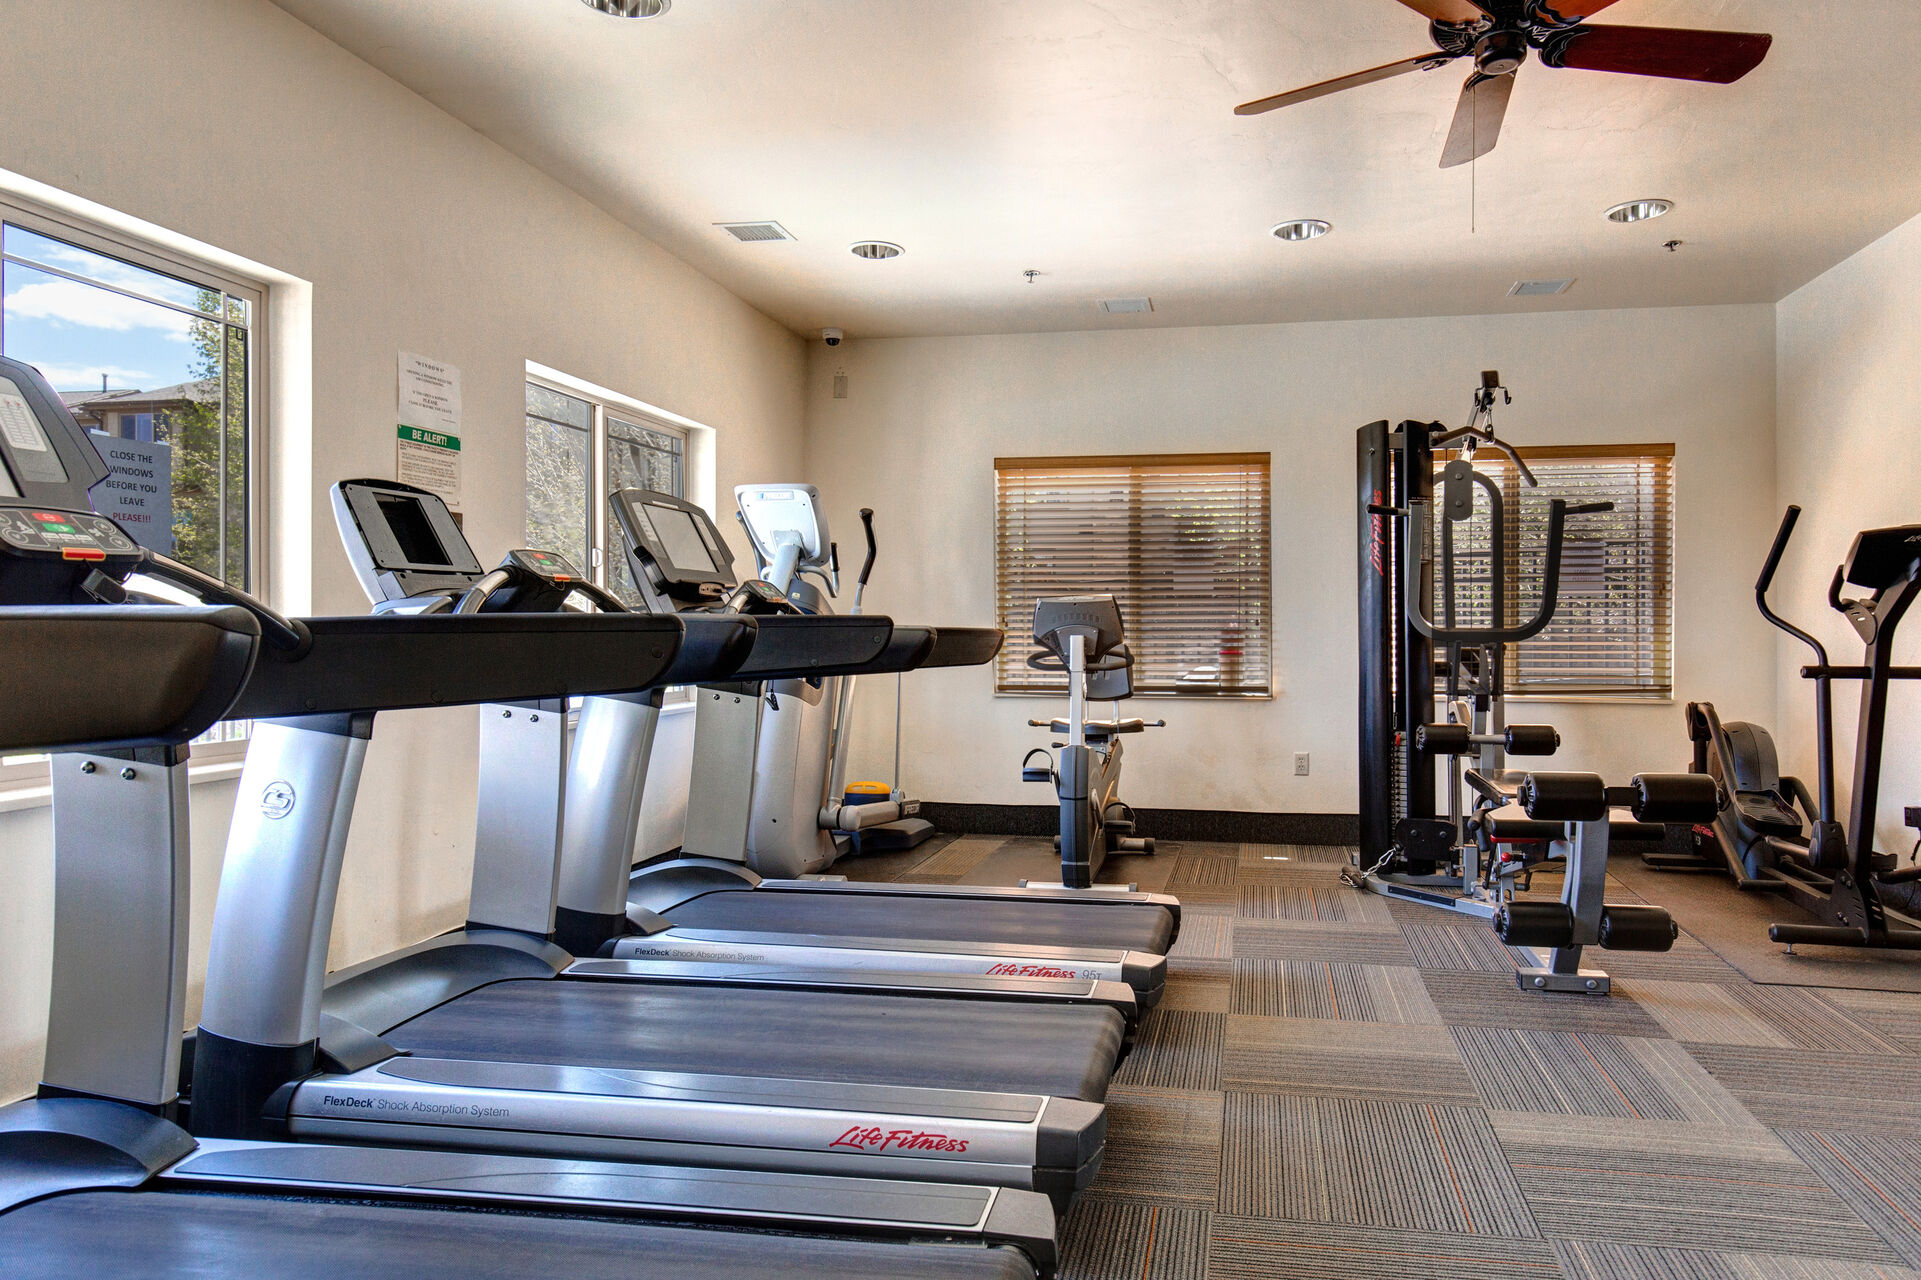 Fitness center in the clubhouse